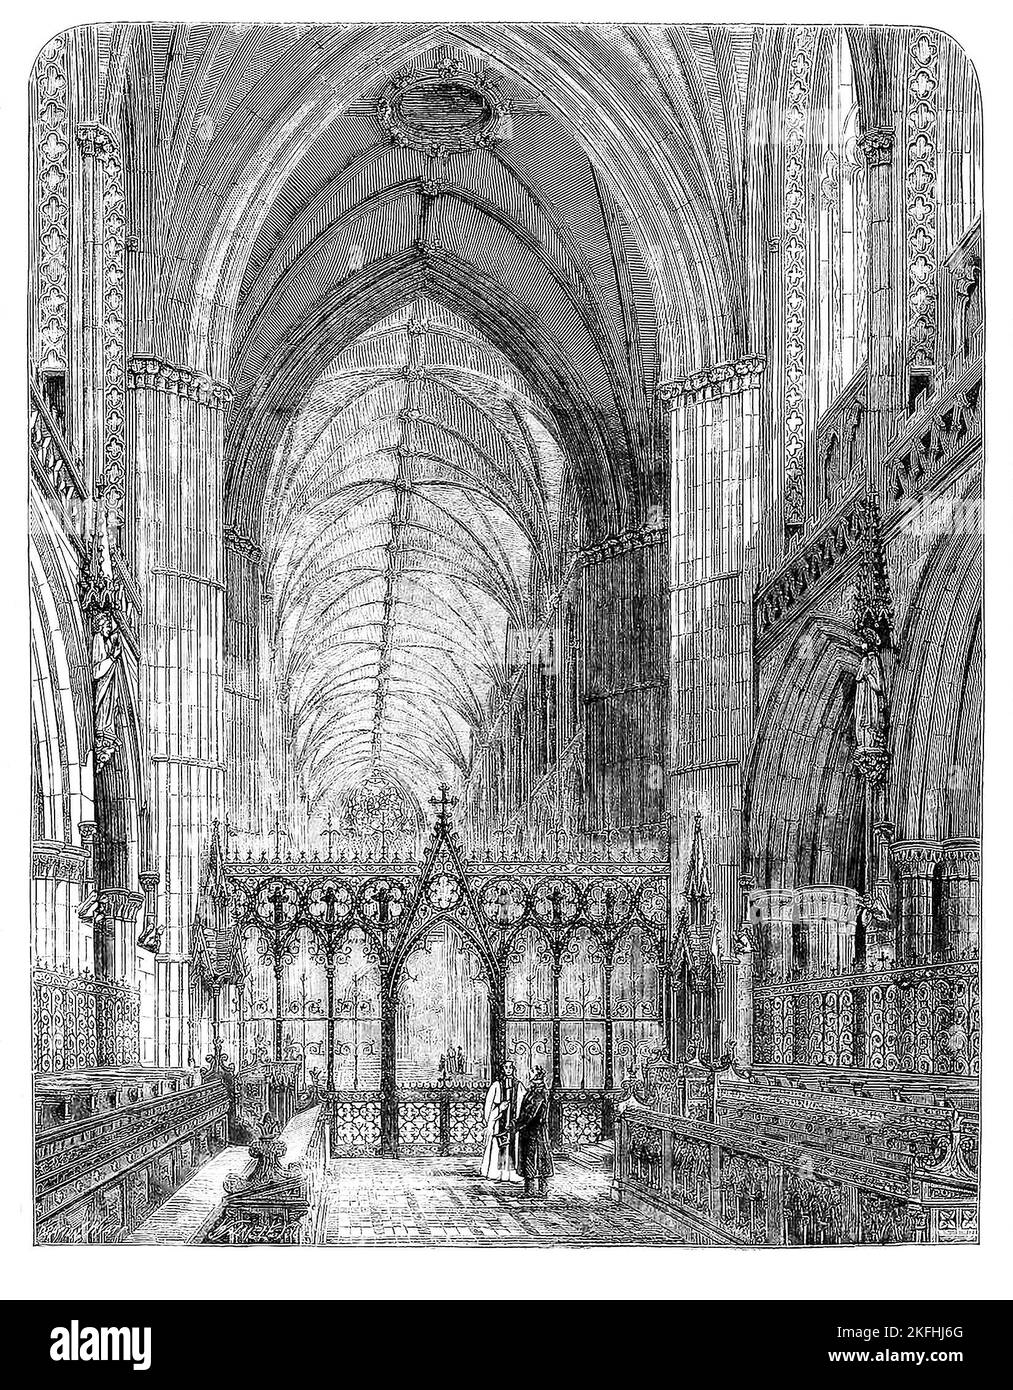 An 1860 sketch of the choir dating from 1200 of Lichfield Cathedral, an Anglican cathedral in Lichfield, Staffordshire, England, dedicated to St Chad and Saint Mary. Started in 1085 and continued through the twelfth century, after the original wooden Saxon church was replaced by a Norman cathedral made from stone, and in turn replaced by the present Gothic cathedral begun in 1195. Stock Photo